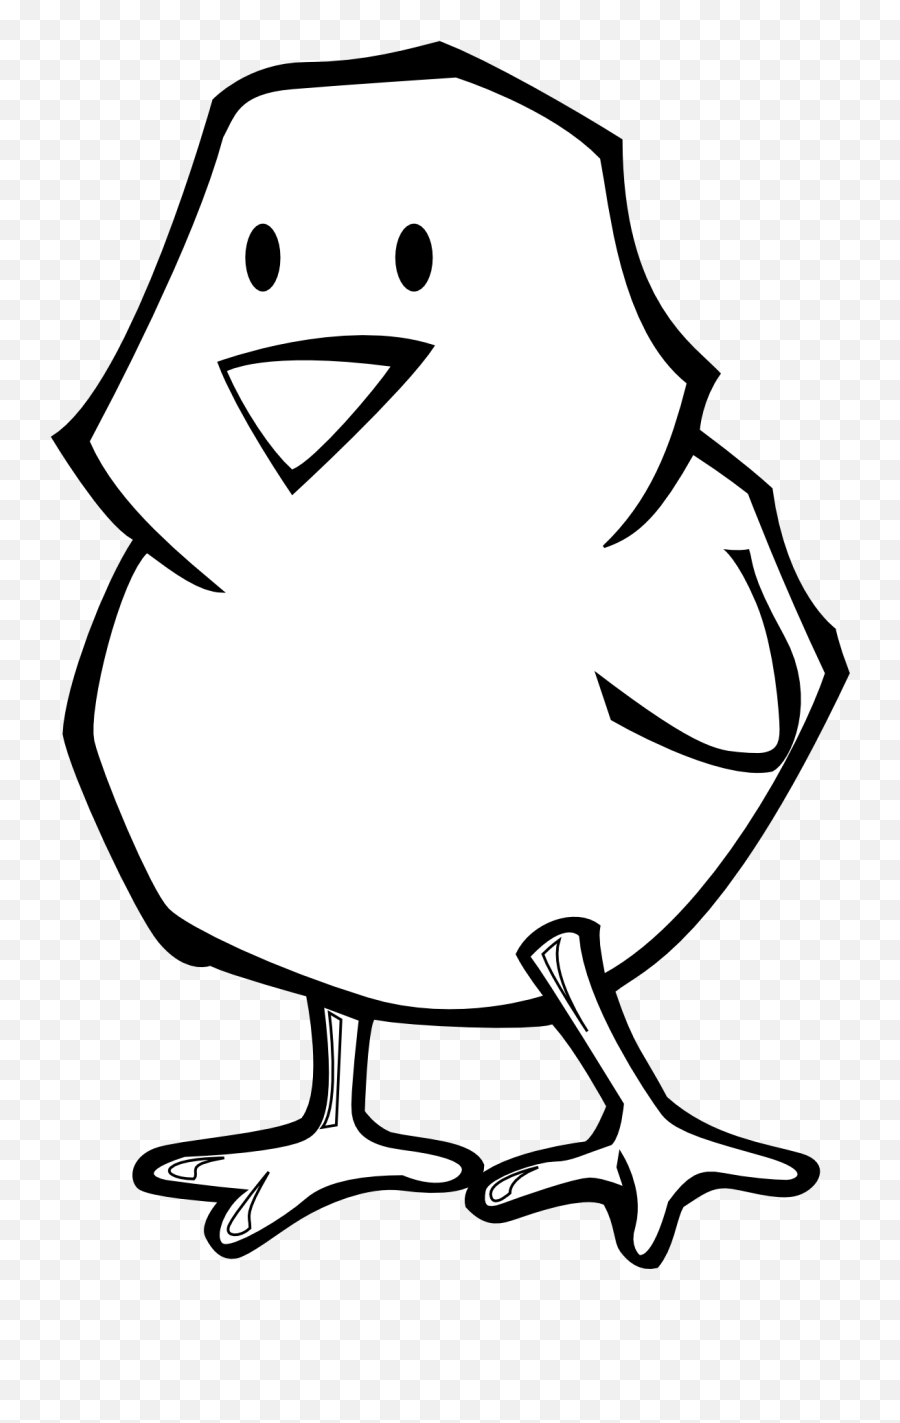 Chicken Clipart Black And White Free Images - Clipartix Easter Chick Coloring Pages Emoji,Chick Emoji